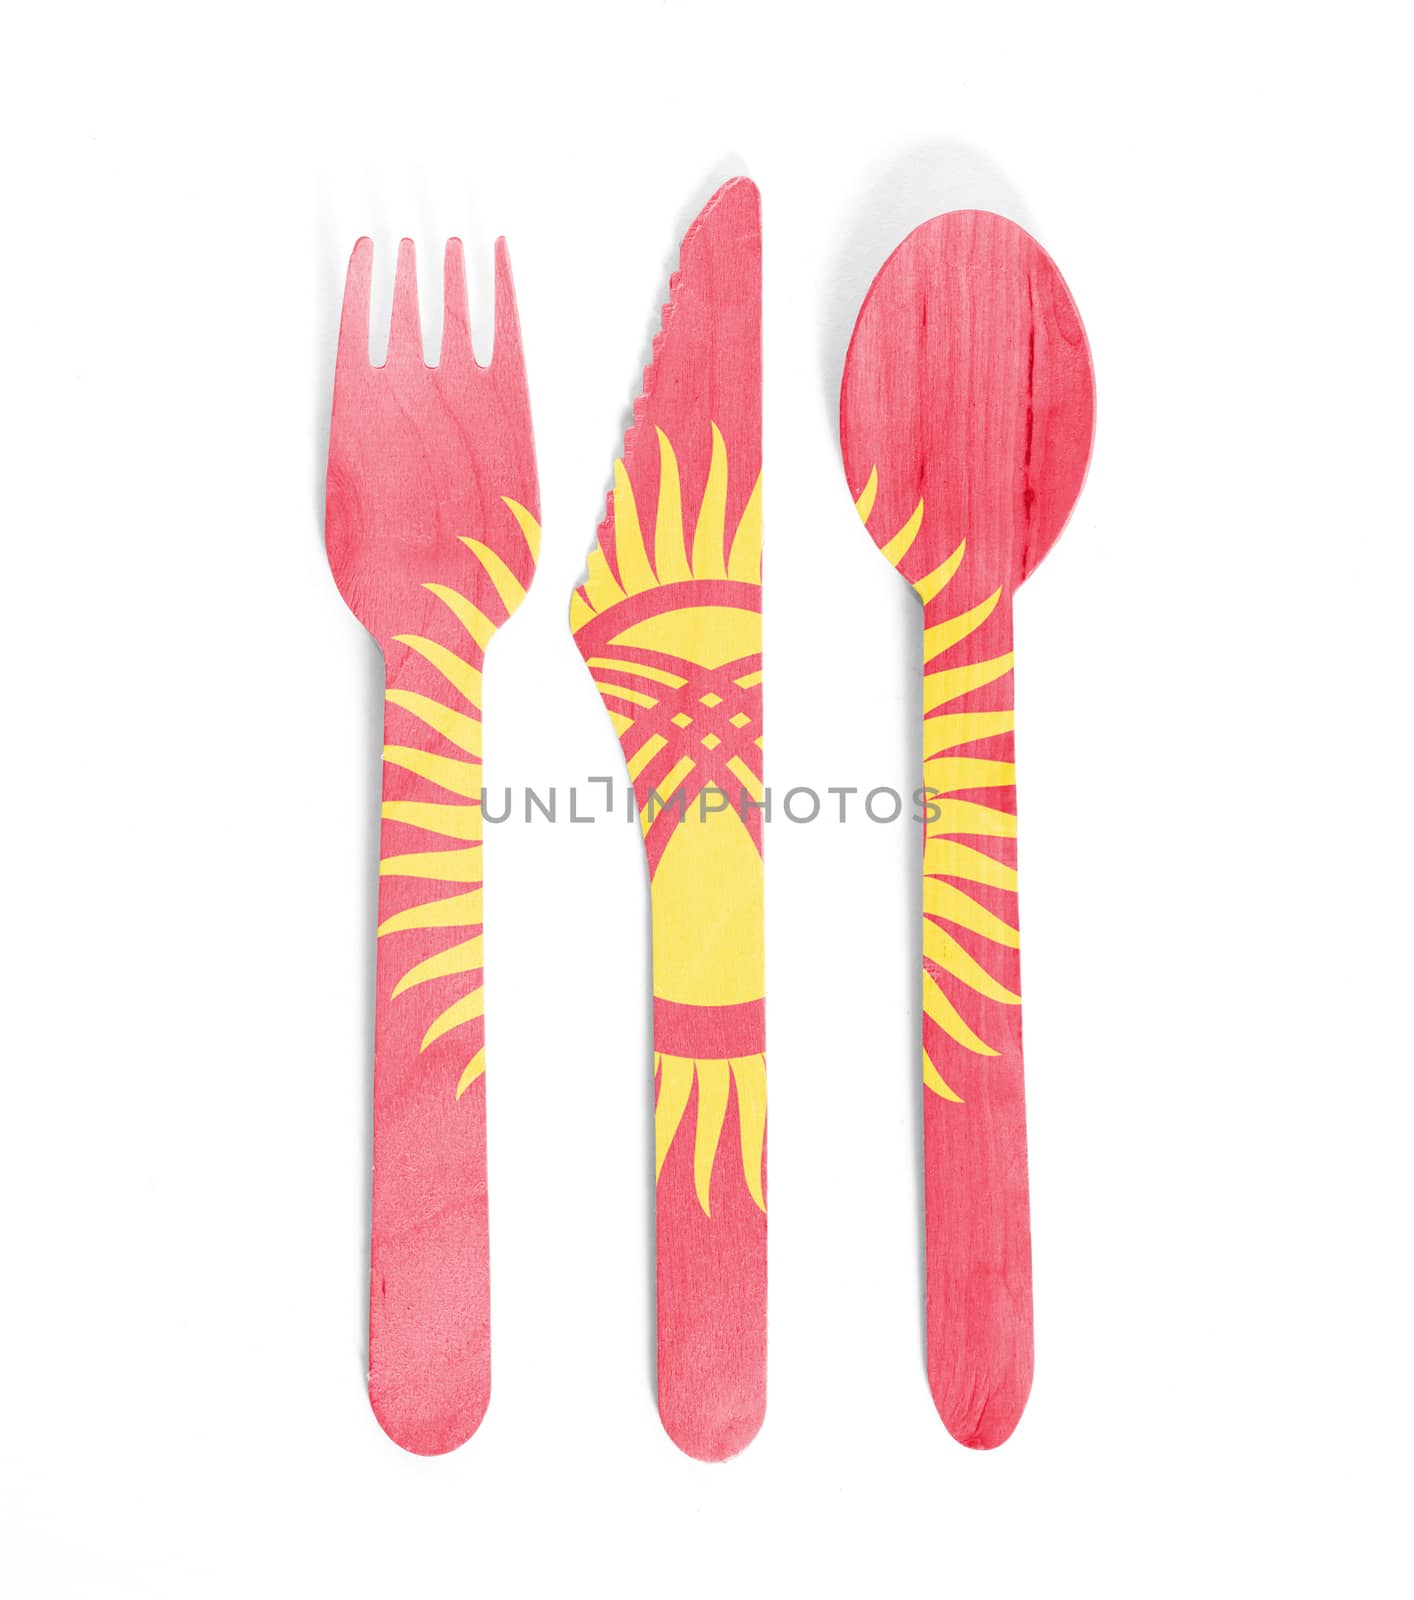 Eco friendly wooden cutlery - Plastic free concept - Isolated - Flag of Kyrgyzstan